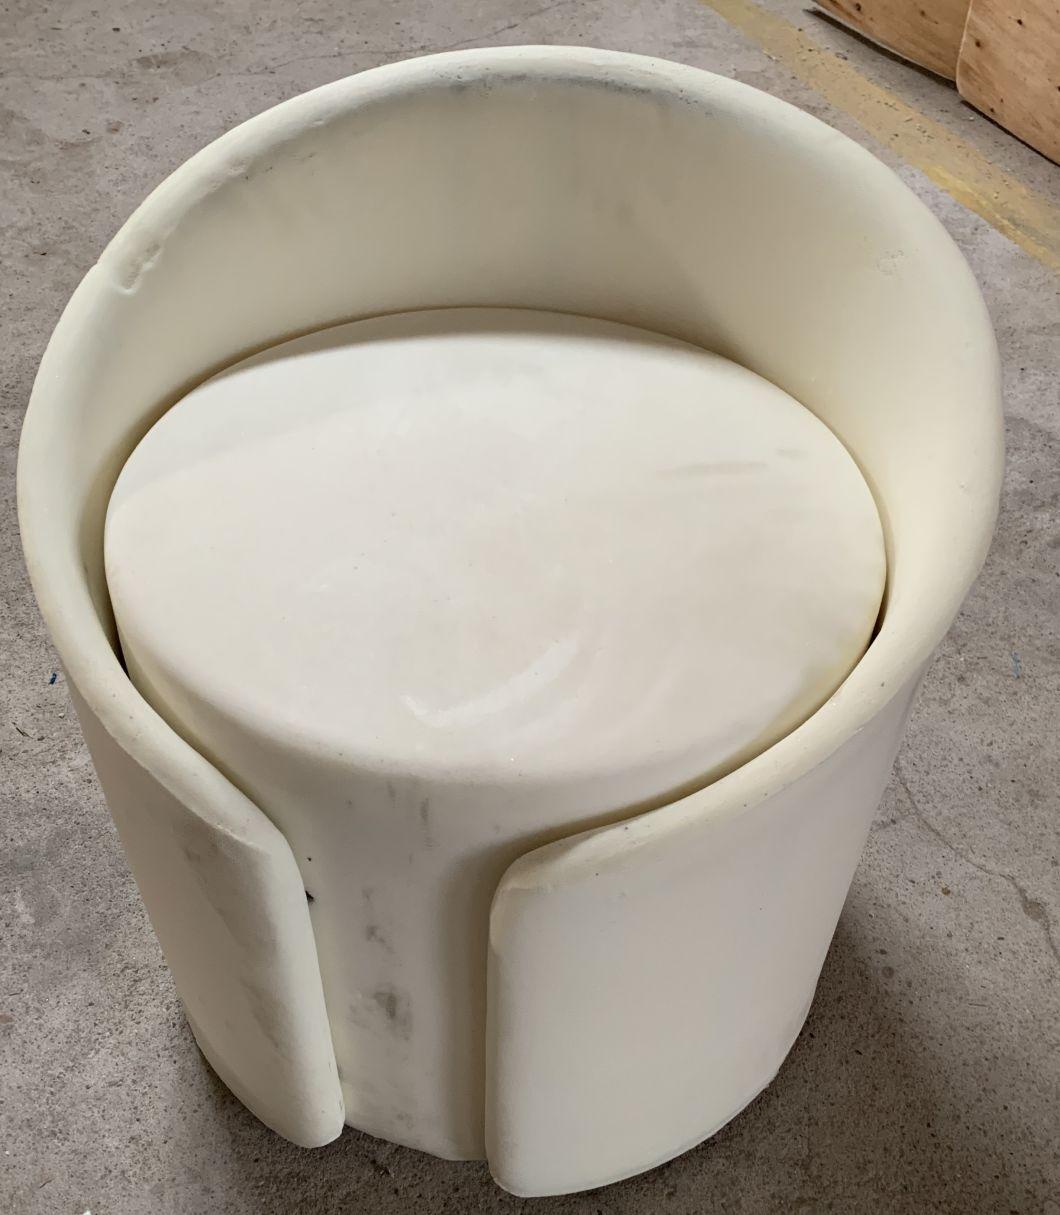 2020 New Moulded Injection Foam Round Column Pouf Bar Stool